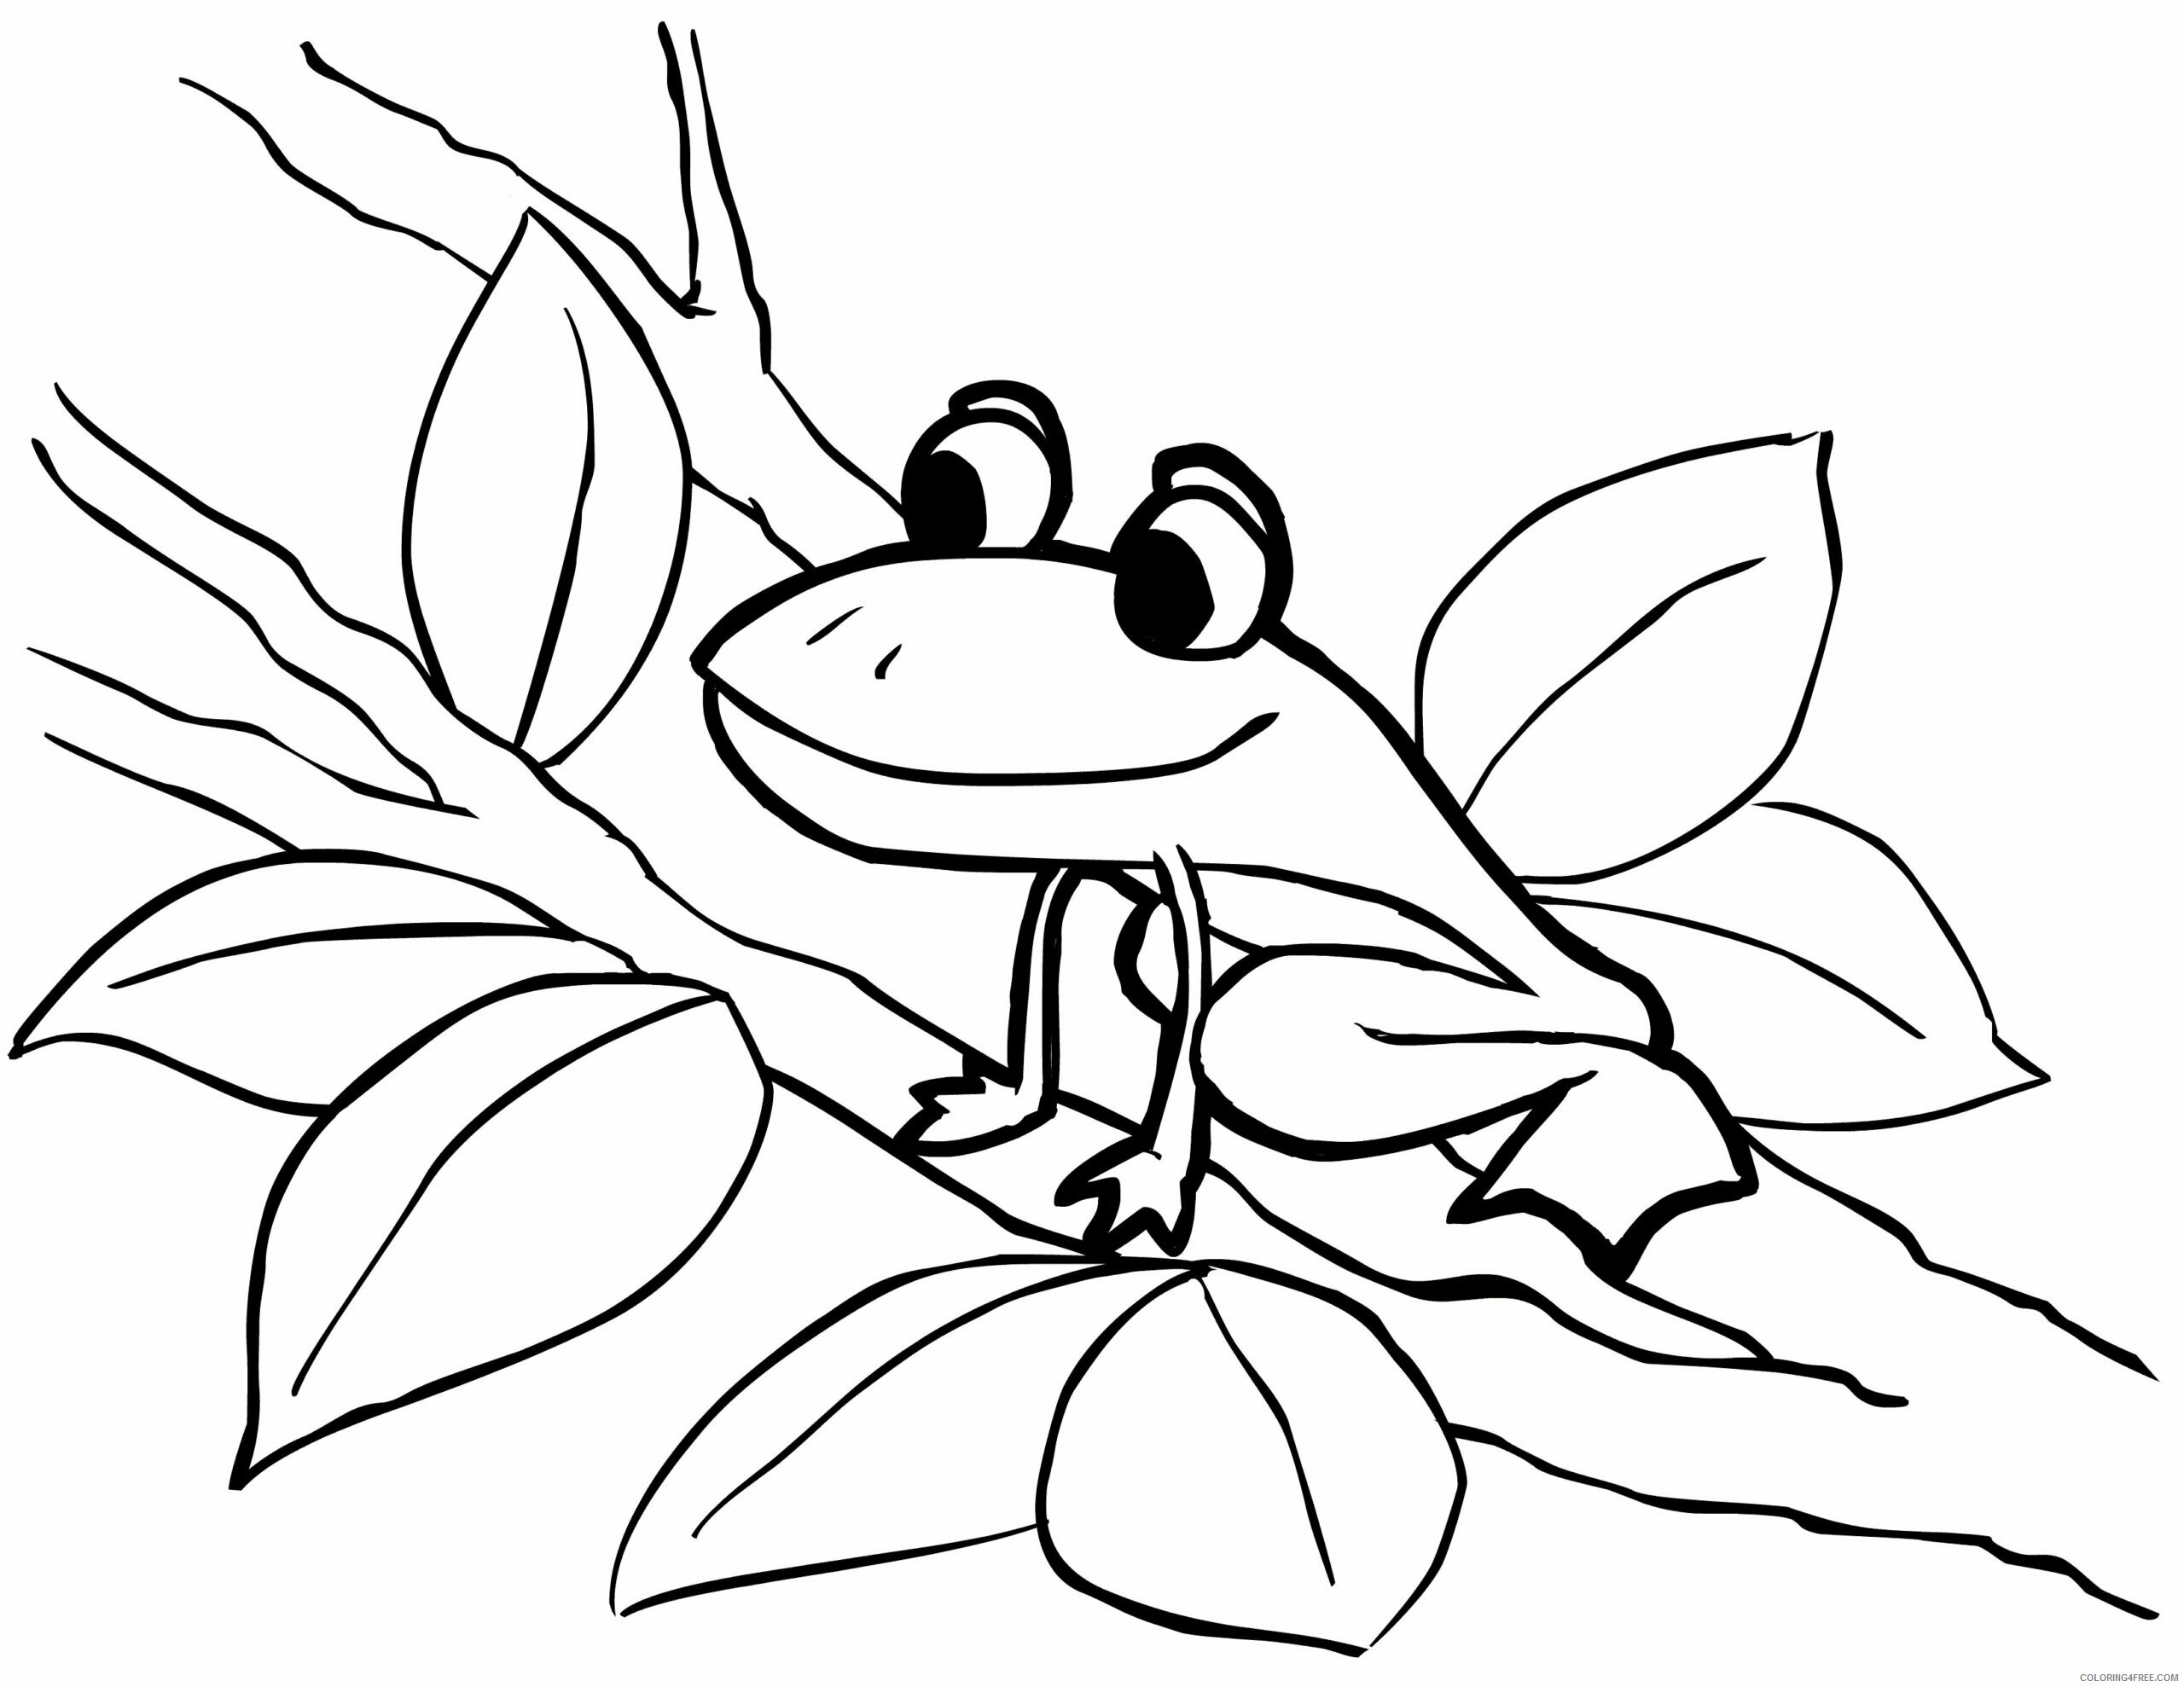 Frog Coloring Pages Animal Printable Sheets of Frogs 2021 2270 Coloring4free